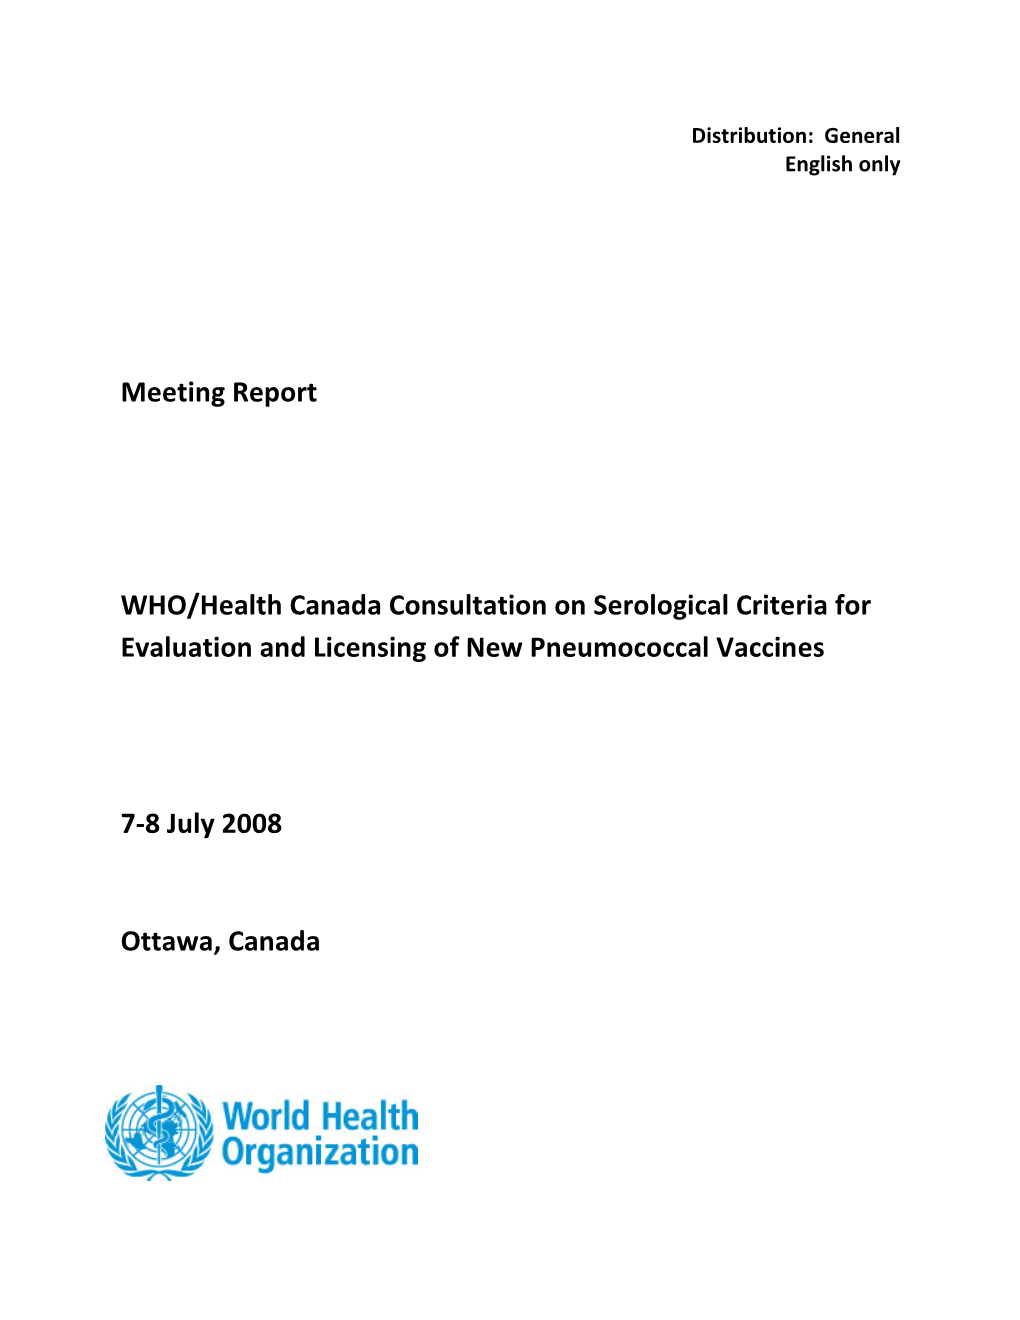 Meeting Report WHO/Health Canada Consultation on Serological Criteria for Evaluation and Licensing of New Pneumococcal Vaccines